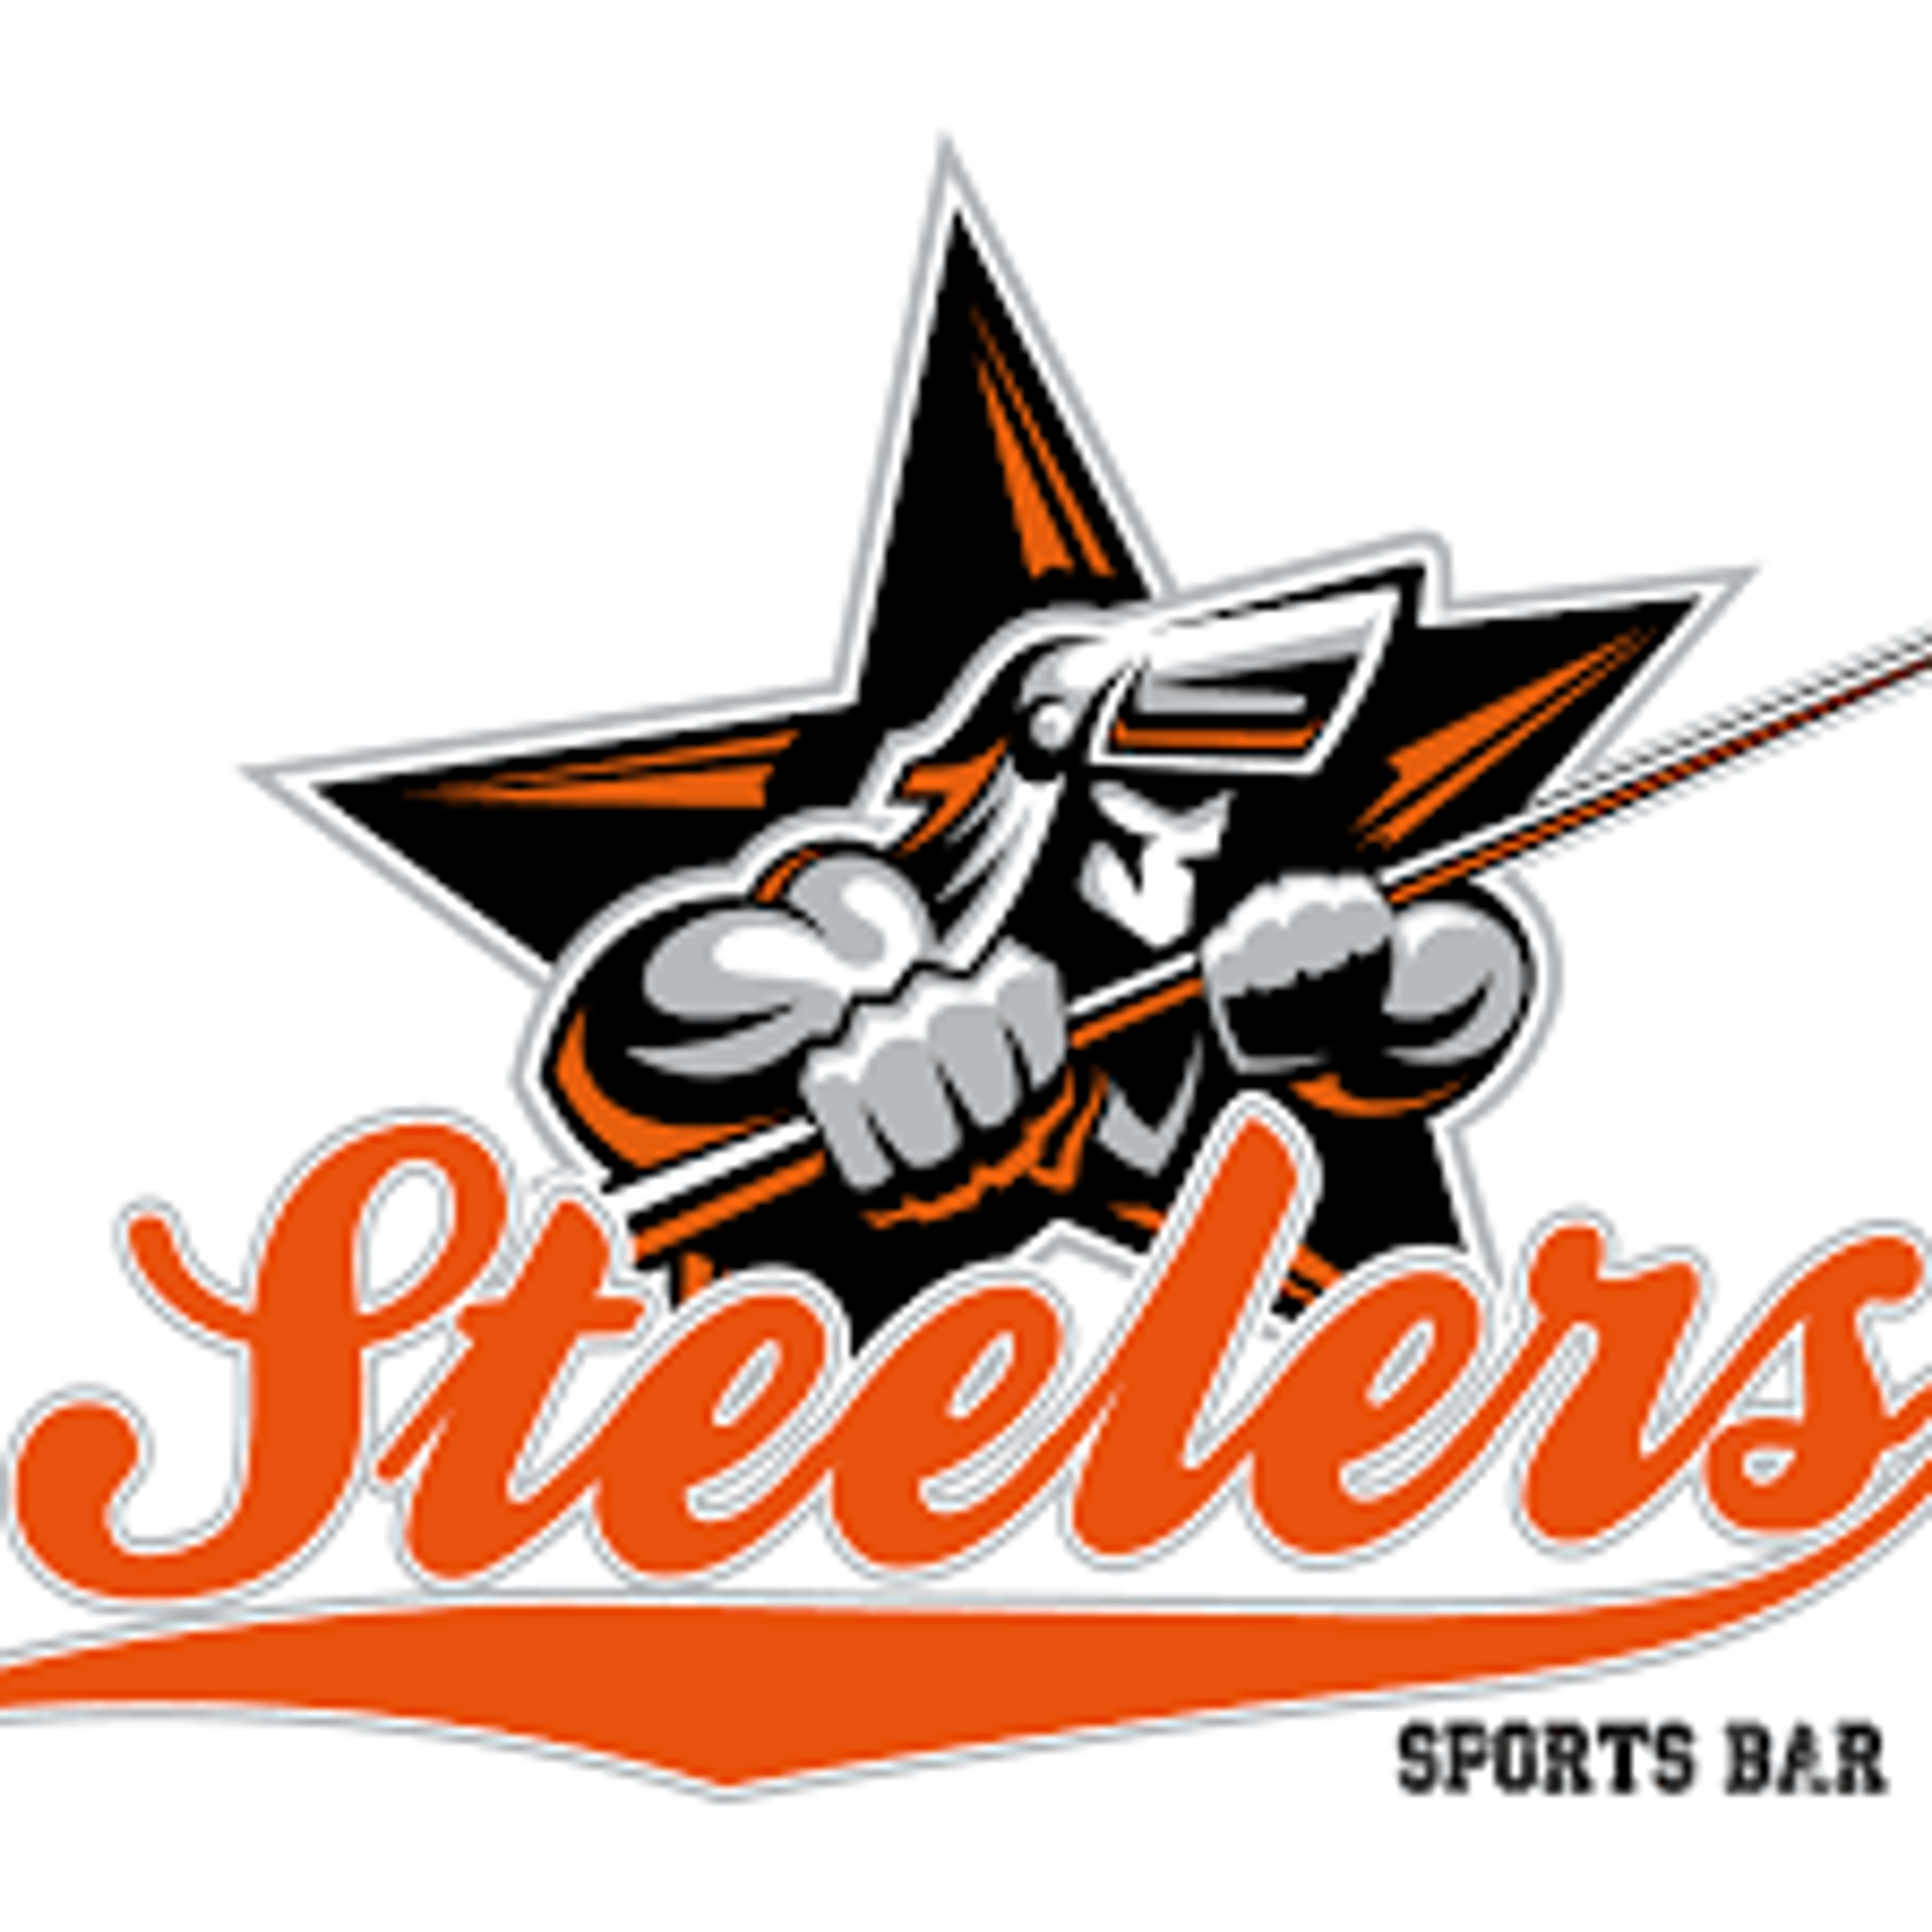 Logo for Steelers Sports Bar